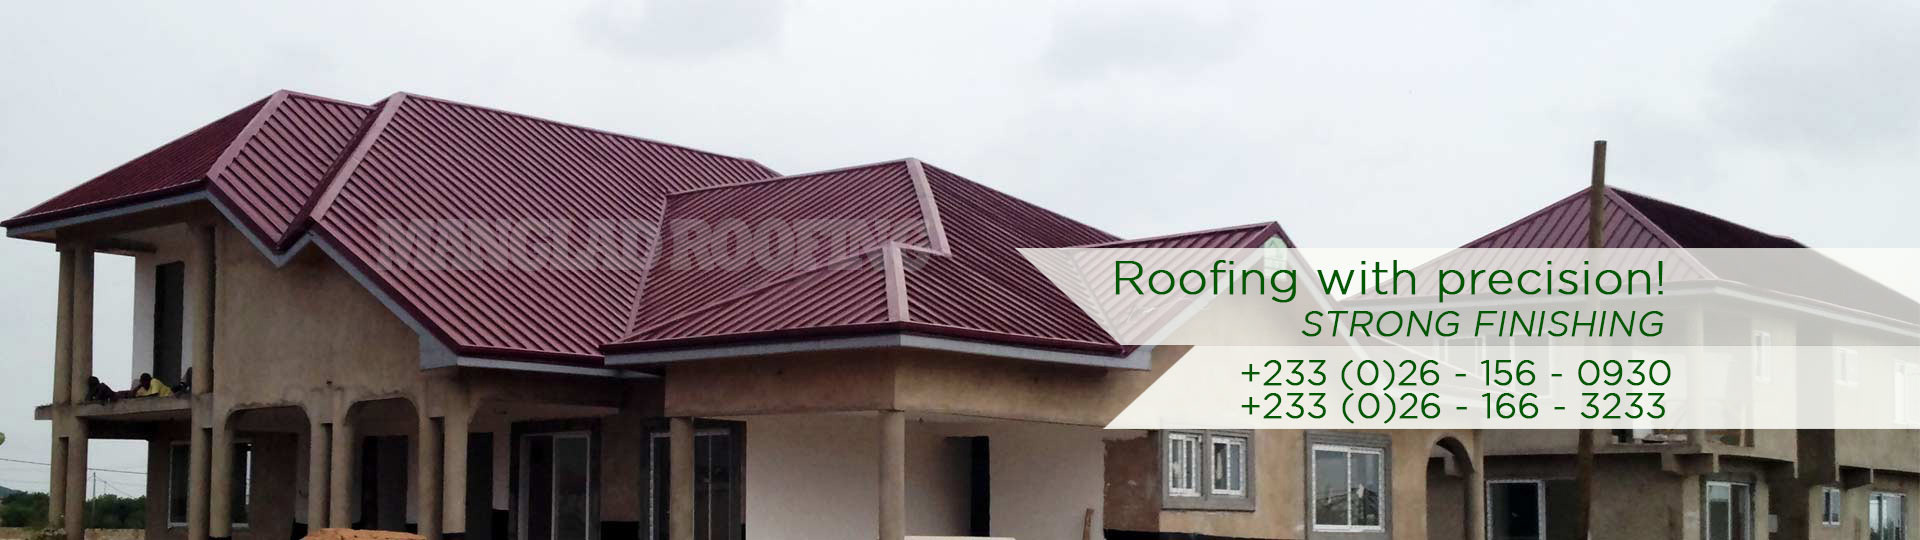 manglad_roofing_systems_ghana1